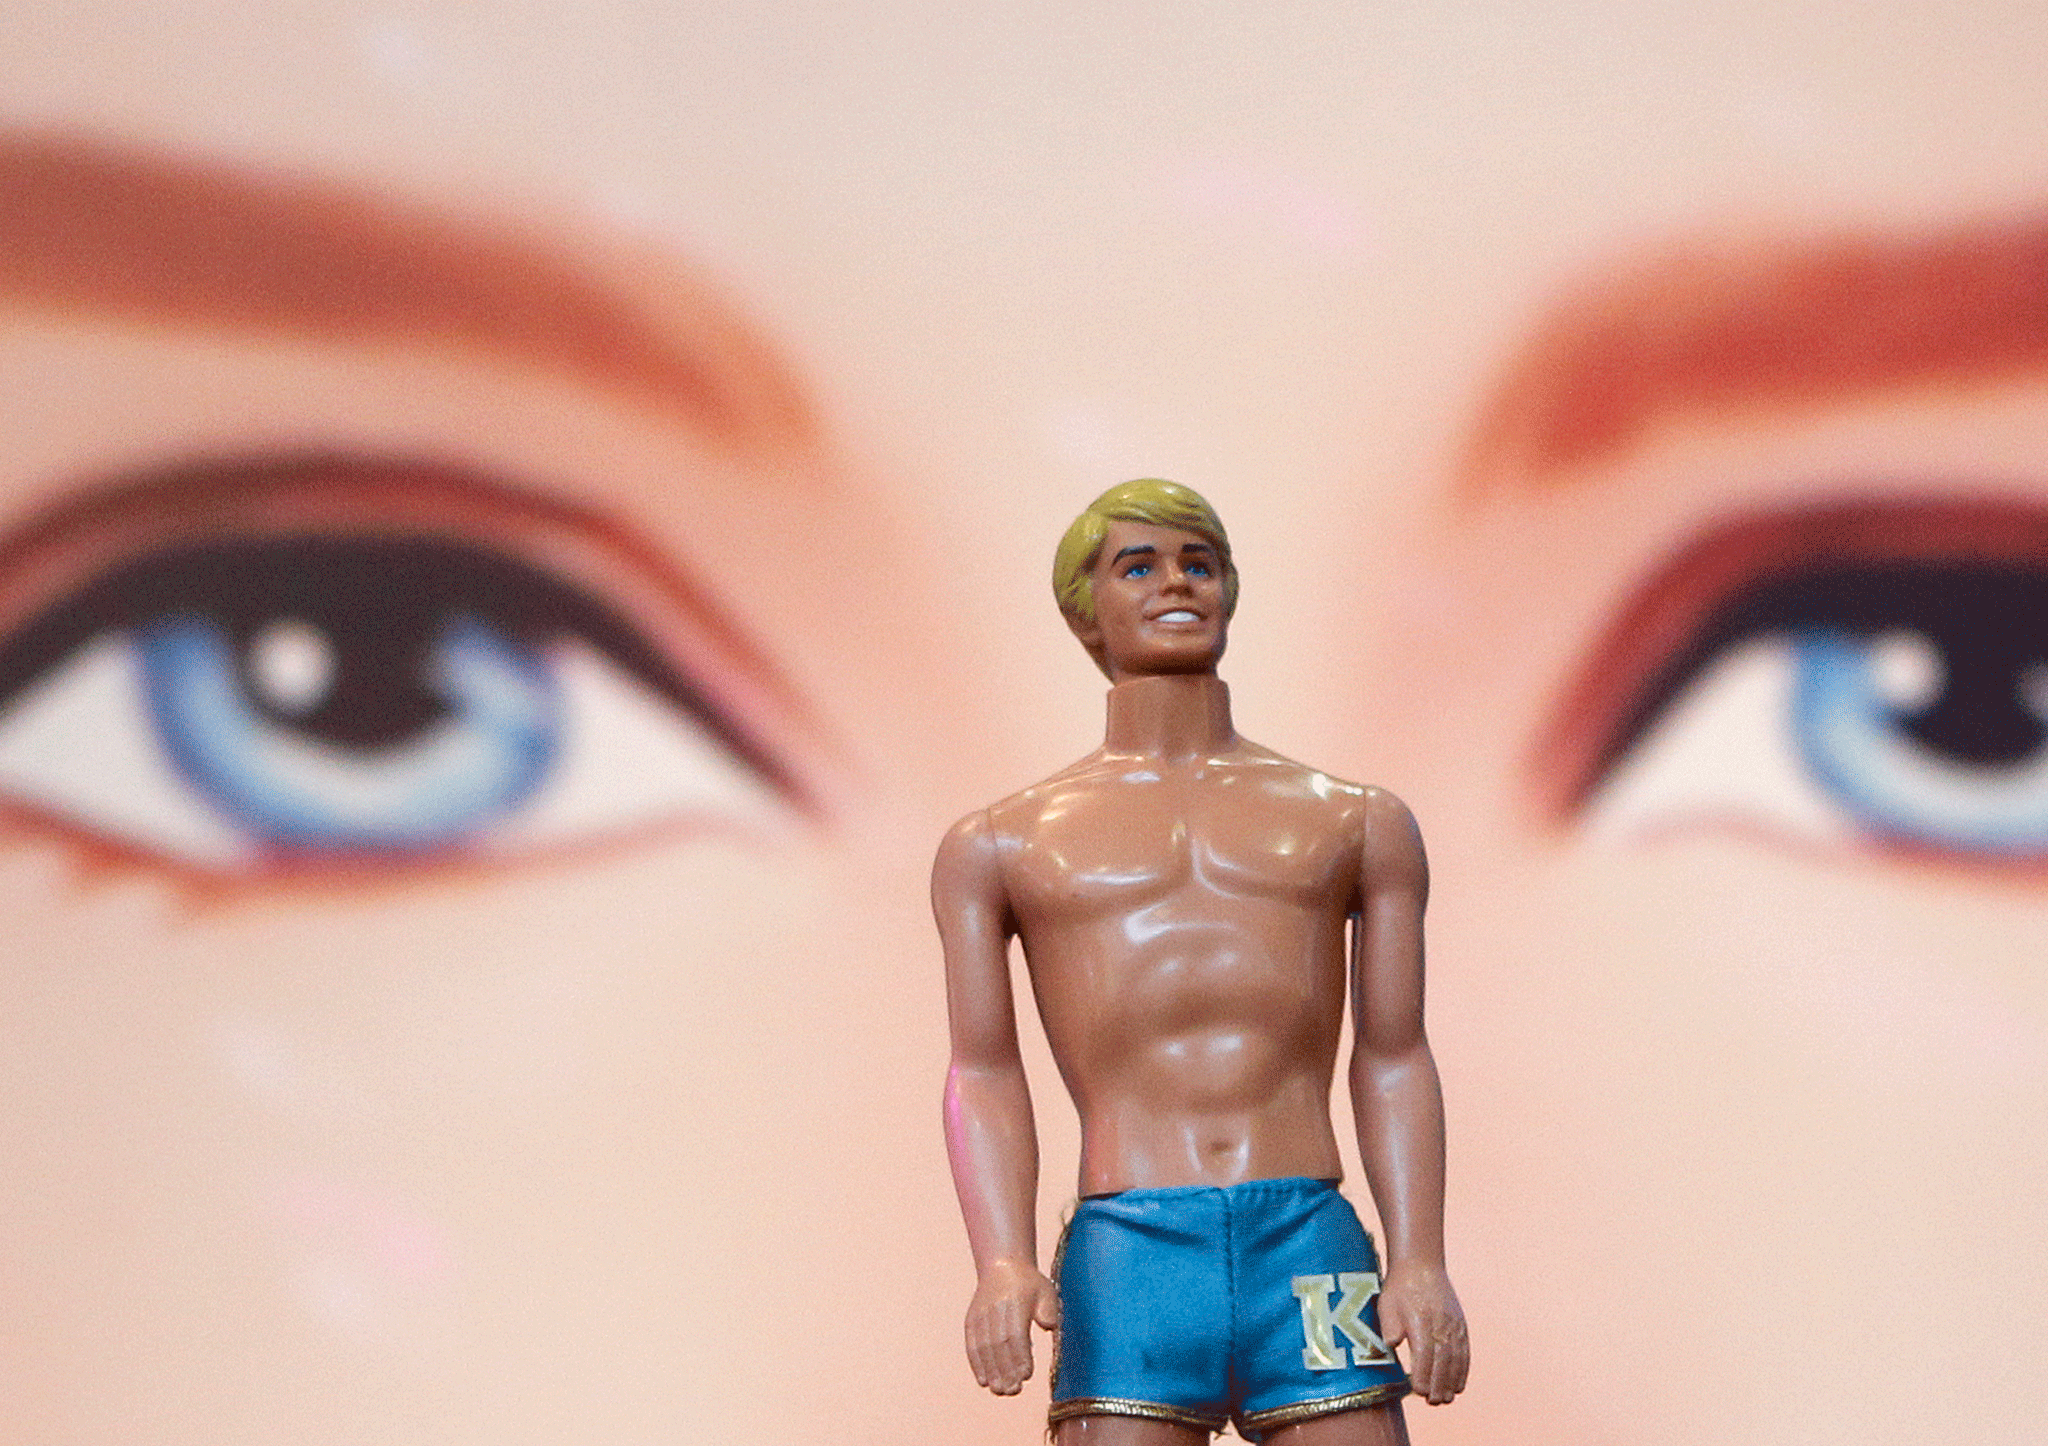 Ken is now available an multiple body types and skin tones, not just the white, muscular, all-American physique with which he had become associated